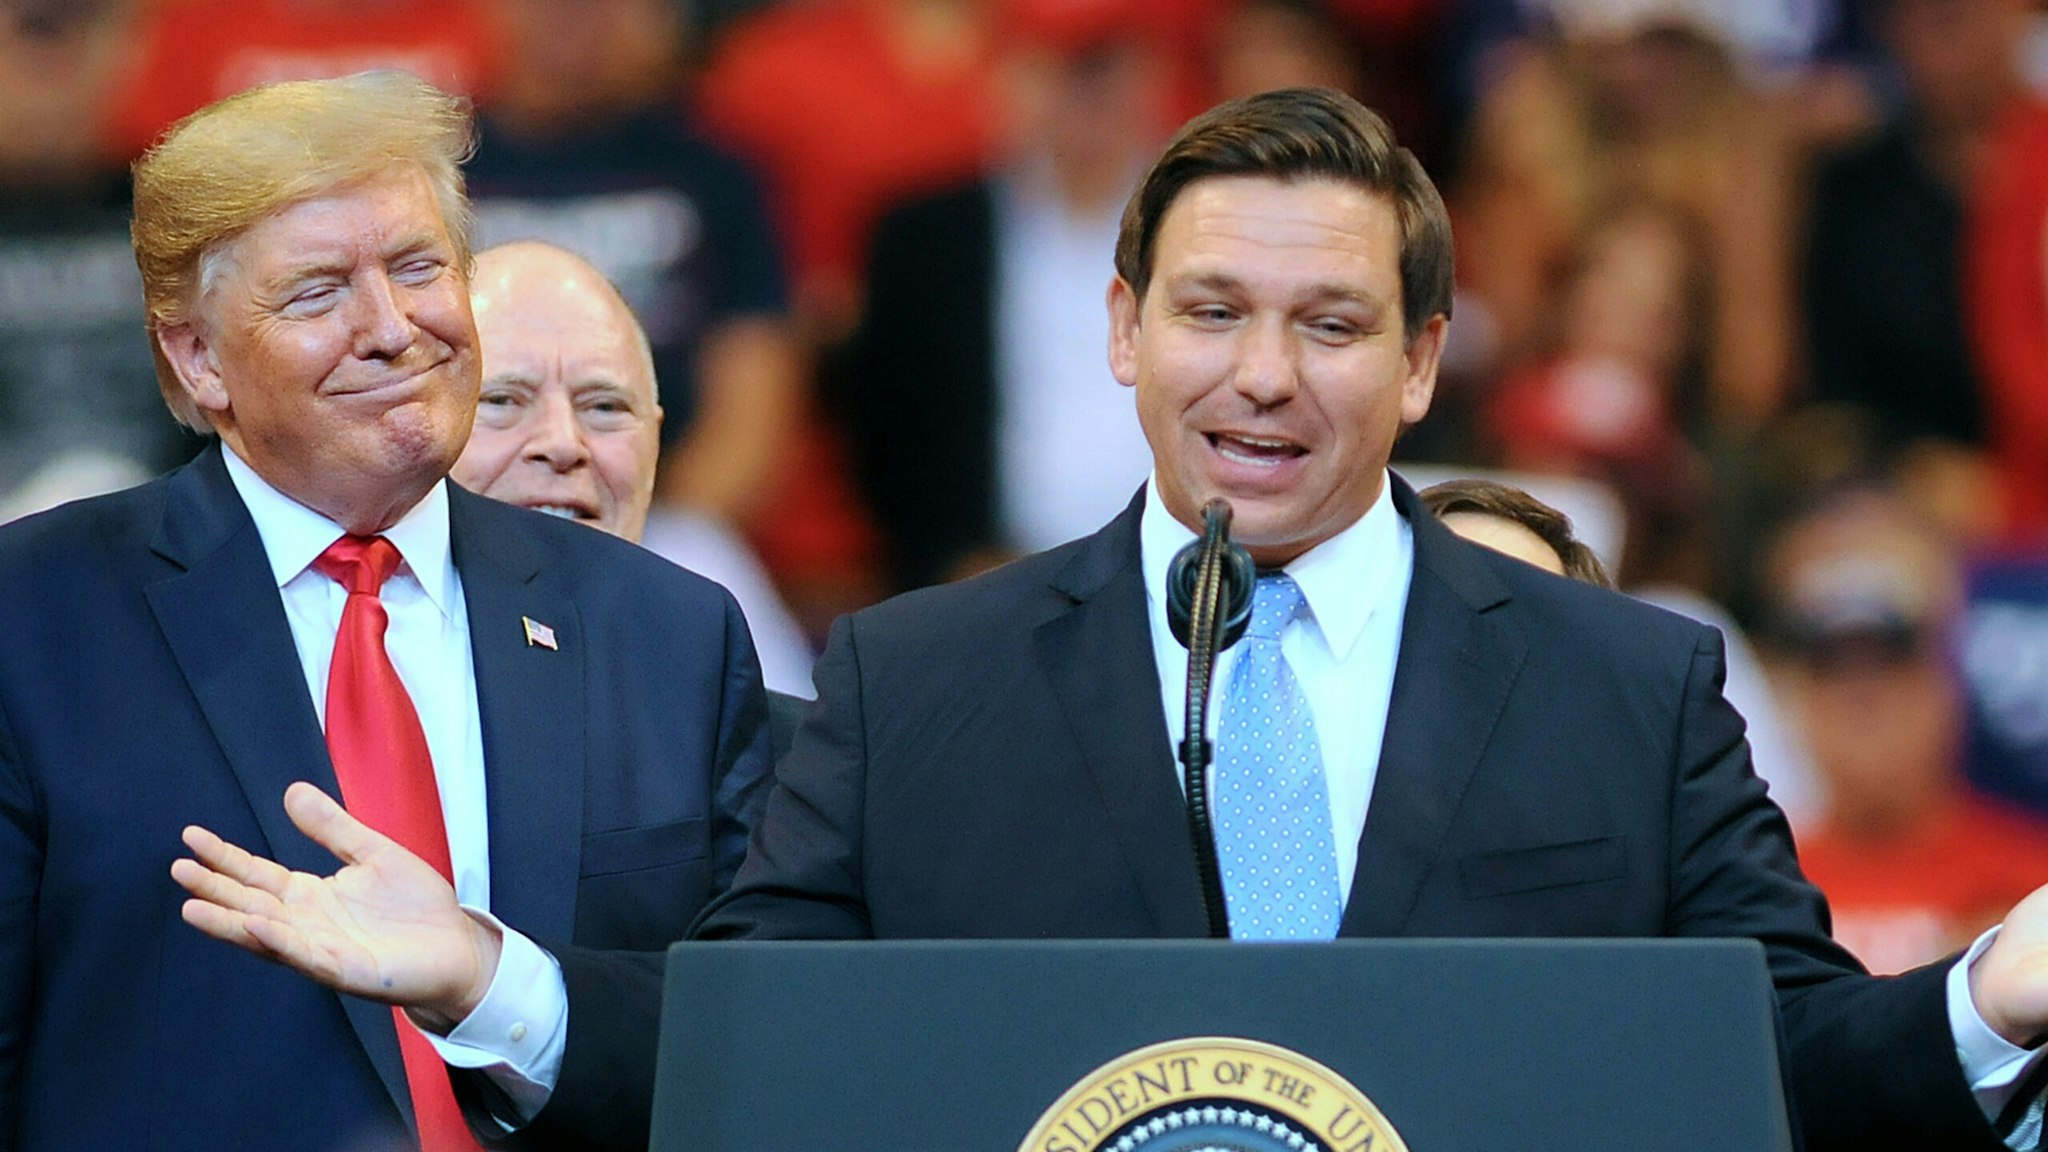 SUNRISE, FLORIDA, UNITED STATES - 2019/11/26: U.S. President Donald Trump looks on as Florida Governor Ron DeSantis speaks during the Florida Homecoming rally at the BB&amp;T Center. Trump recently became an official resident of the state of Florida.